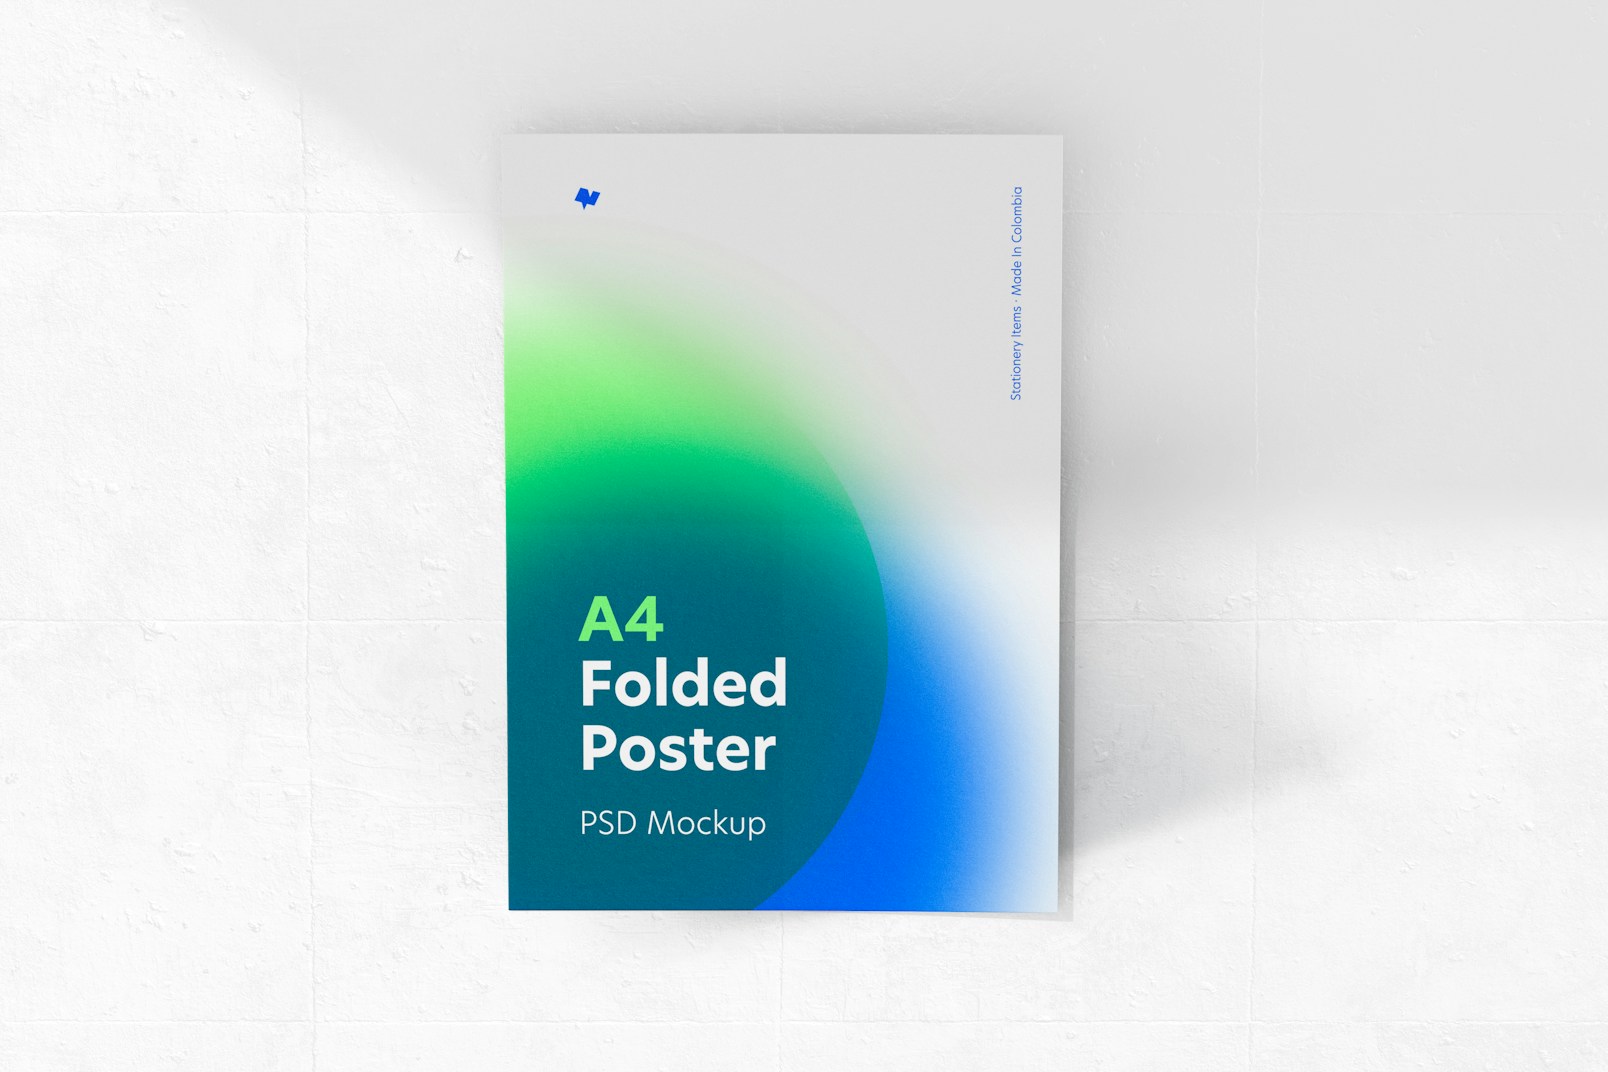 A4 Folded Poster on Wall Mockup